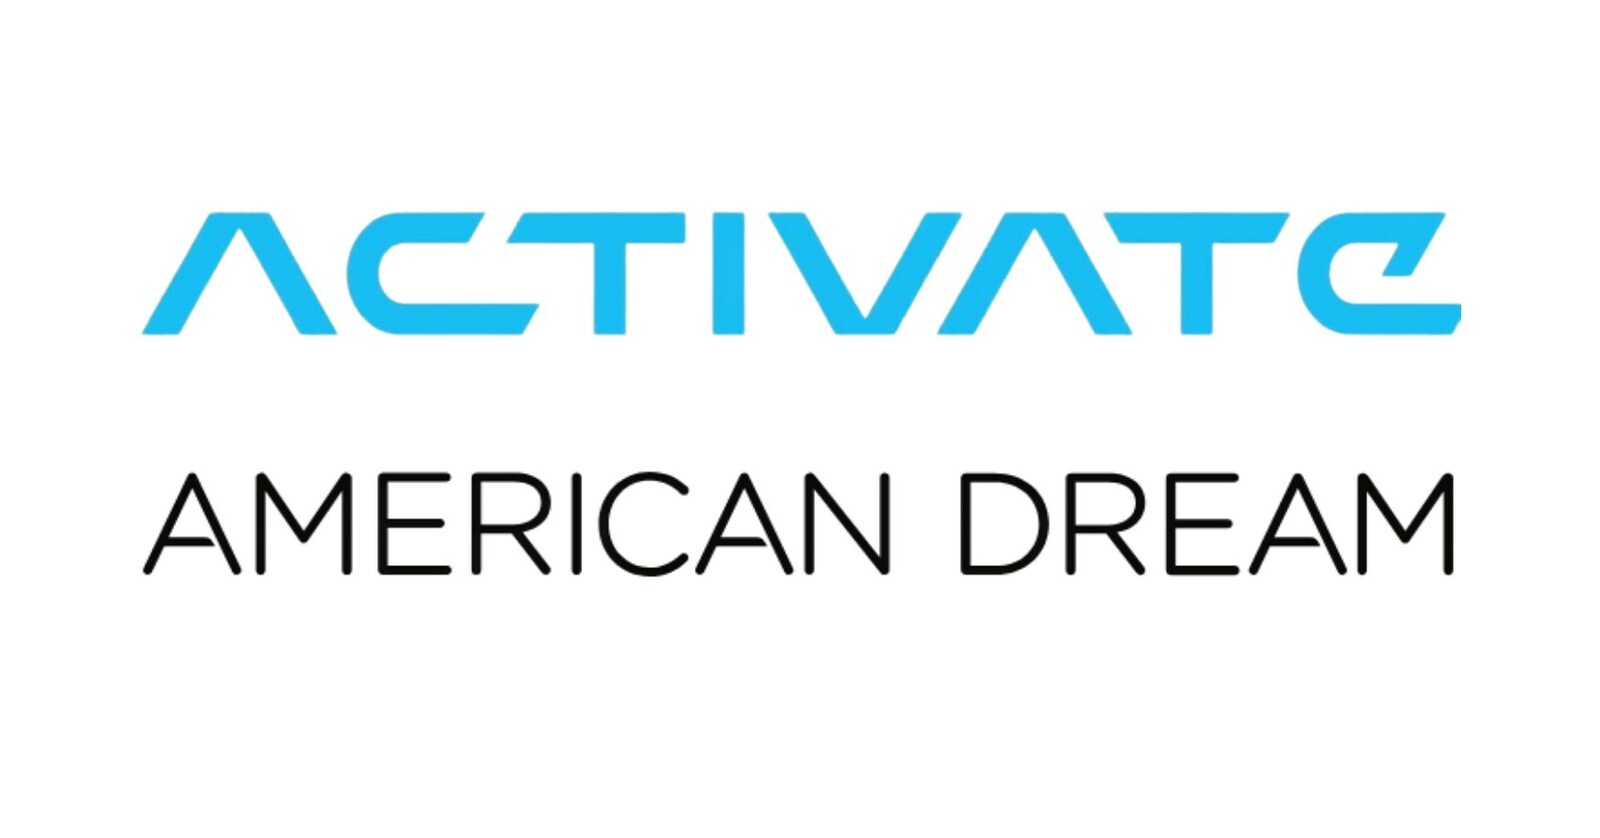 The American Dream becomes a lifestyle and entertainment destination